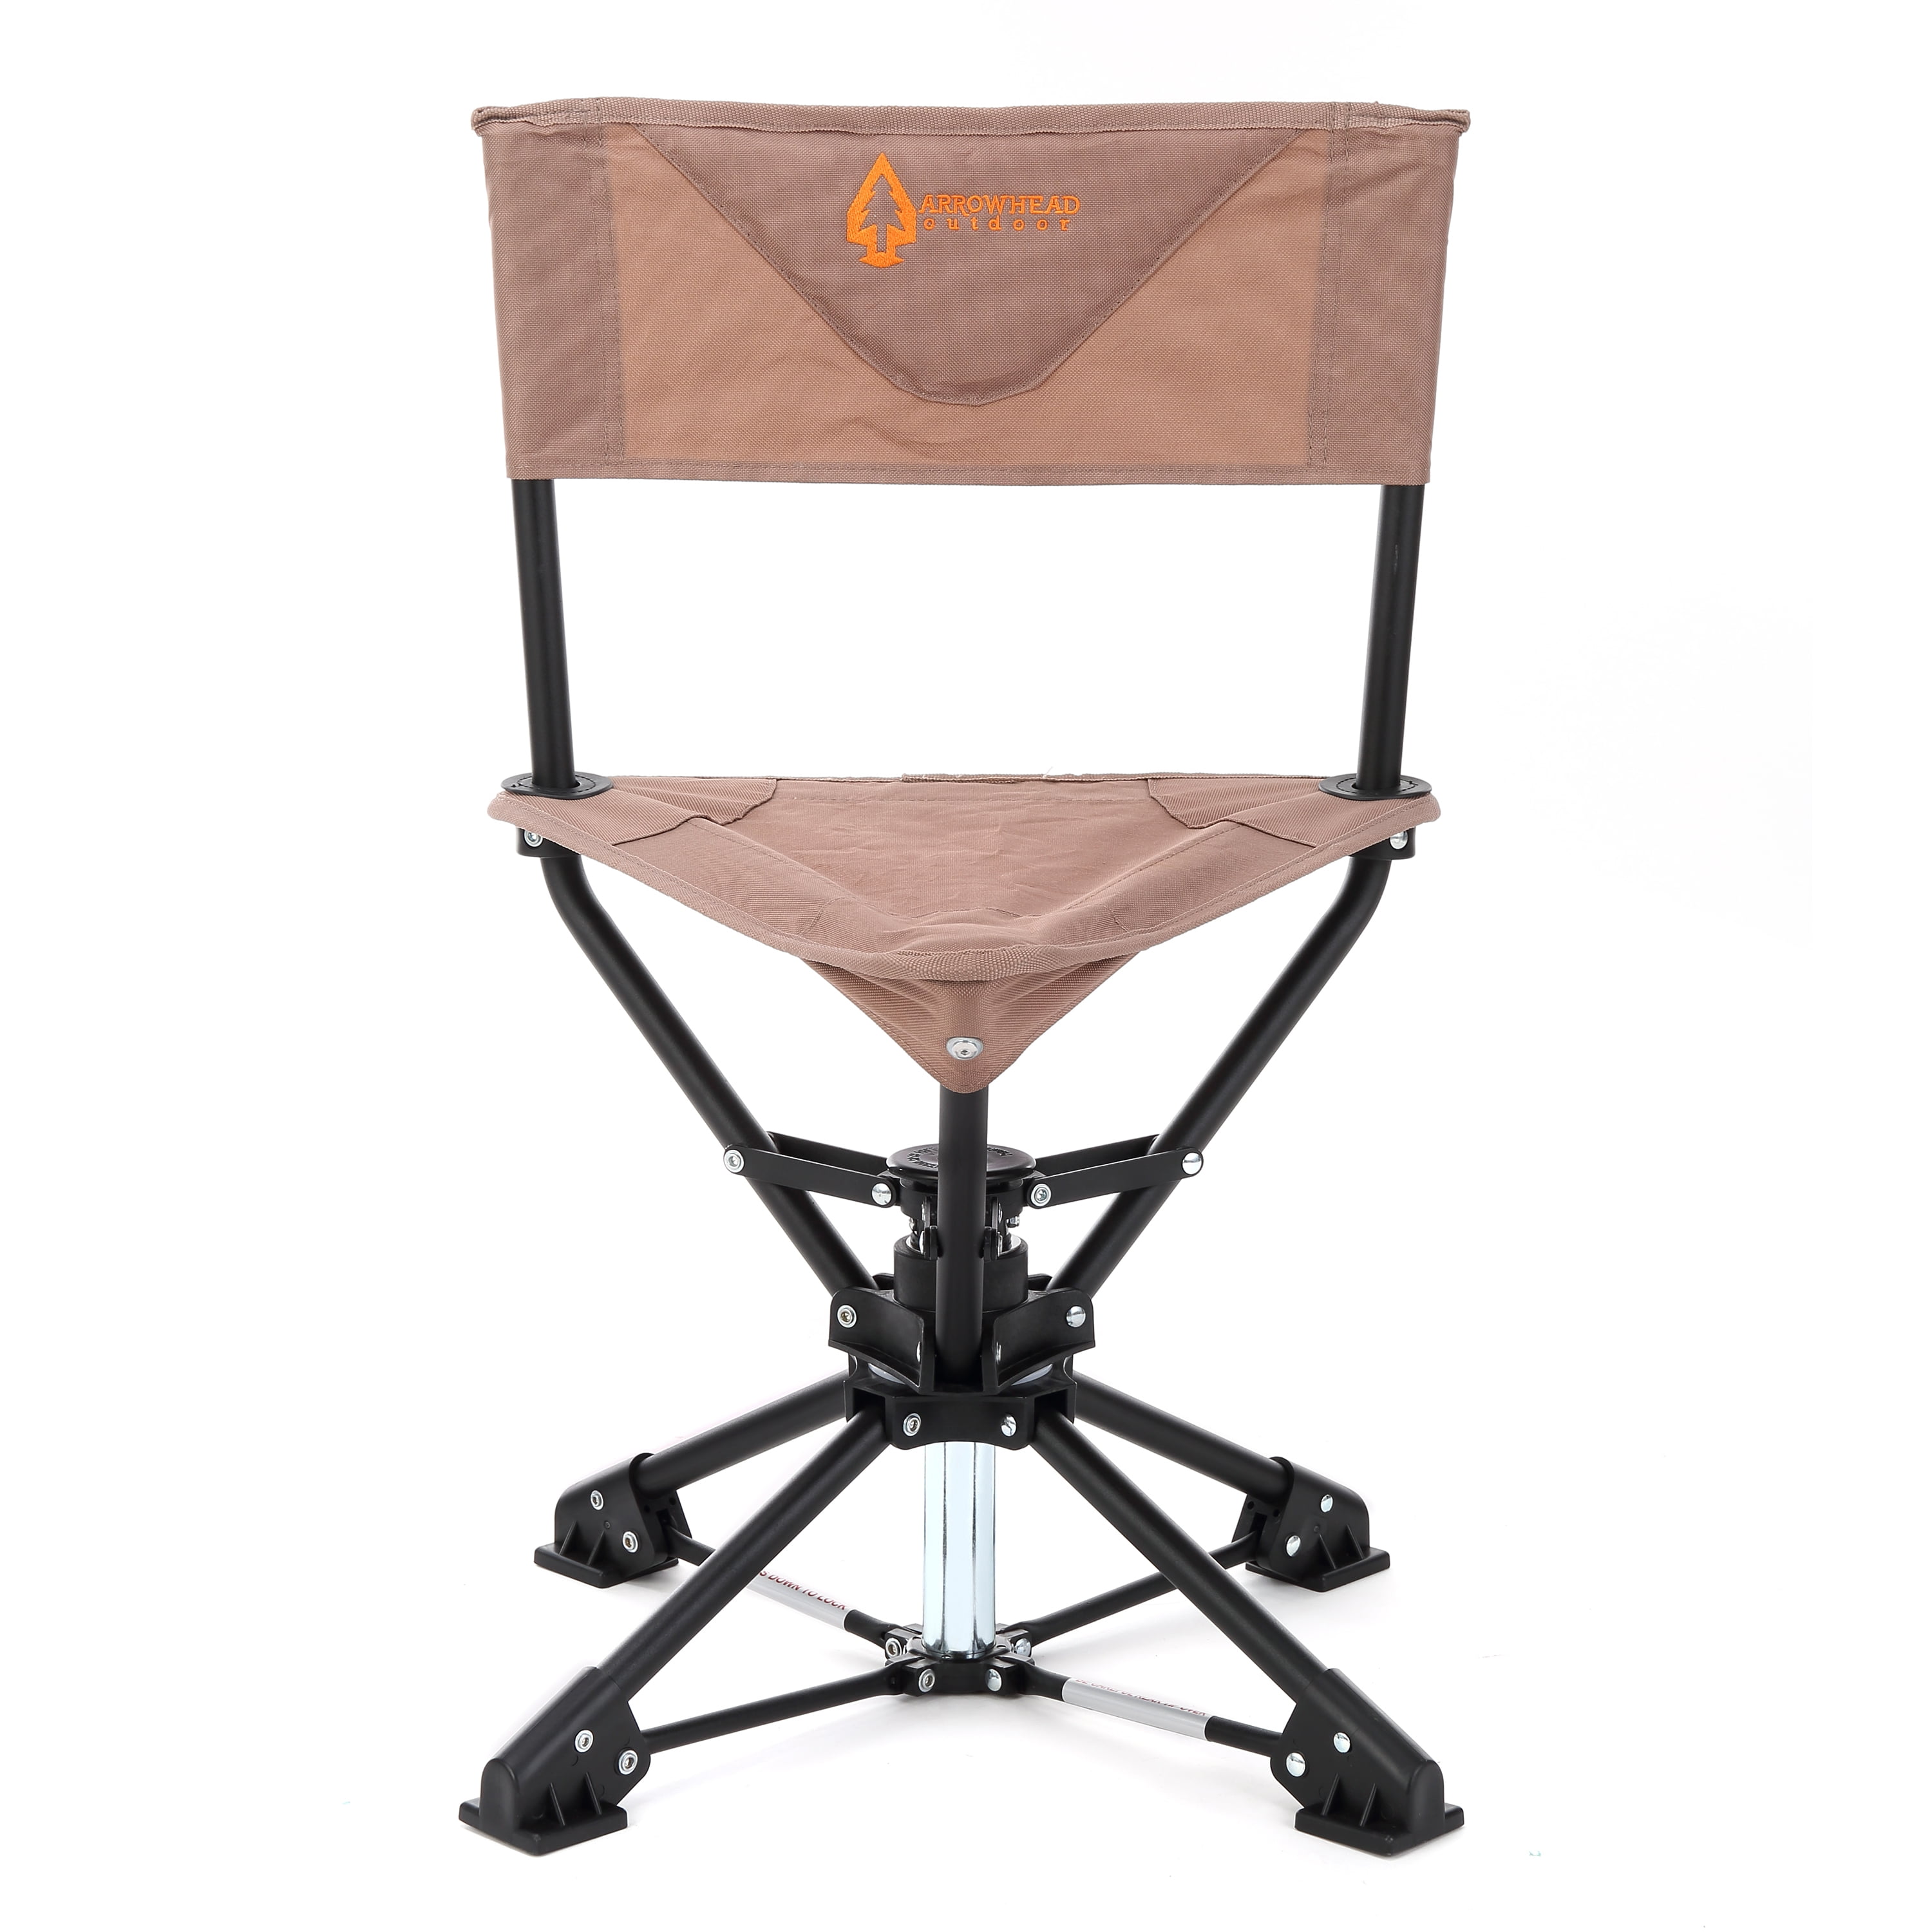 ARROWHEAD OUTDOOR 360° Degree Swivel Hunting Chair Stool Seat, Perfect for  Blinds, No Sink Feet, Supports up to 450lbs, Carrying Case, Steel Frame,  Fishing, High-Grade 600D Canvas, USA-Based Support 